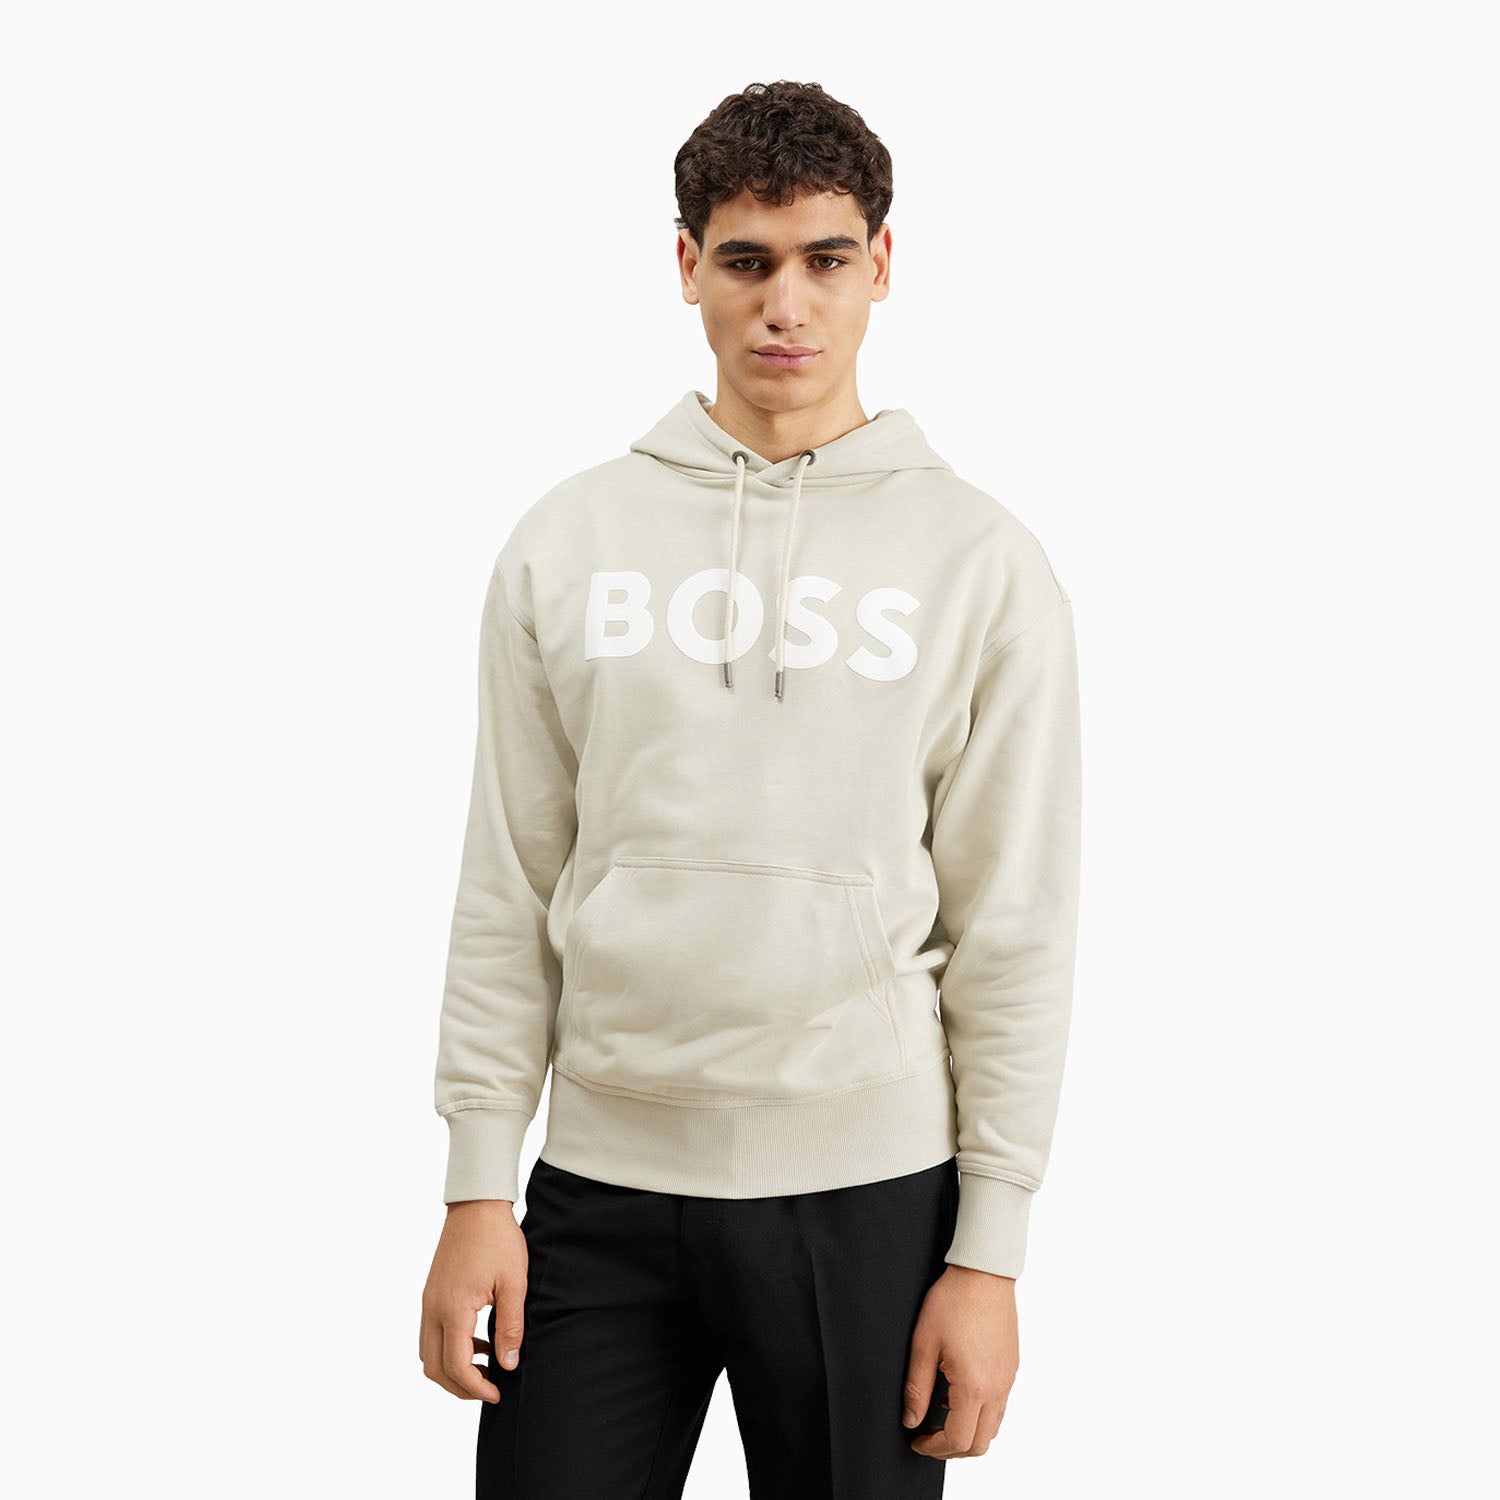 hugo-boss-mens-logo-print-hoodie-in-french-terry-cotton-50487134-271